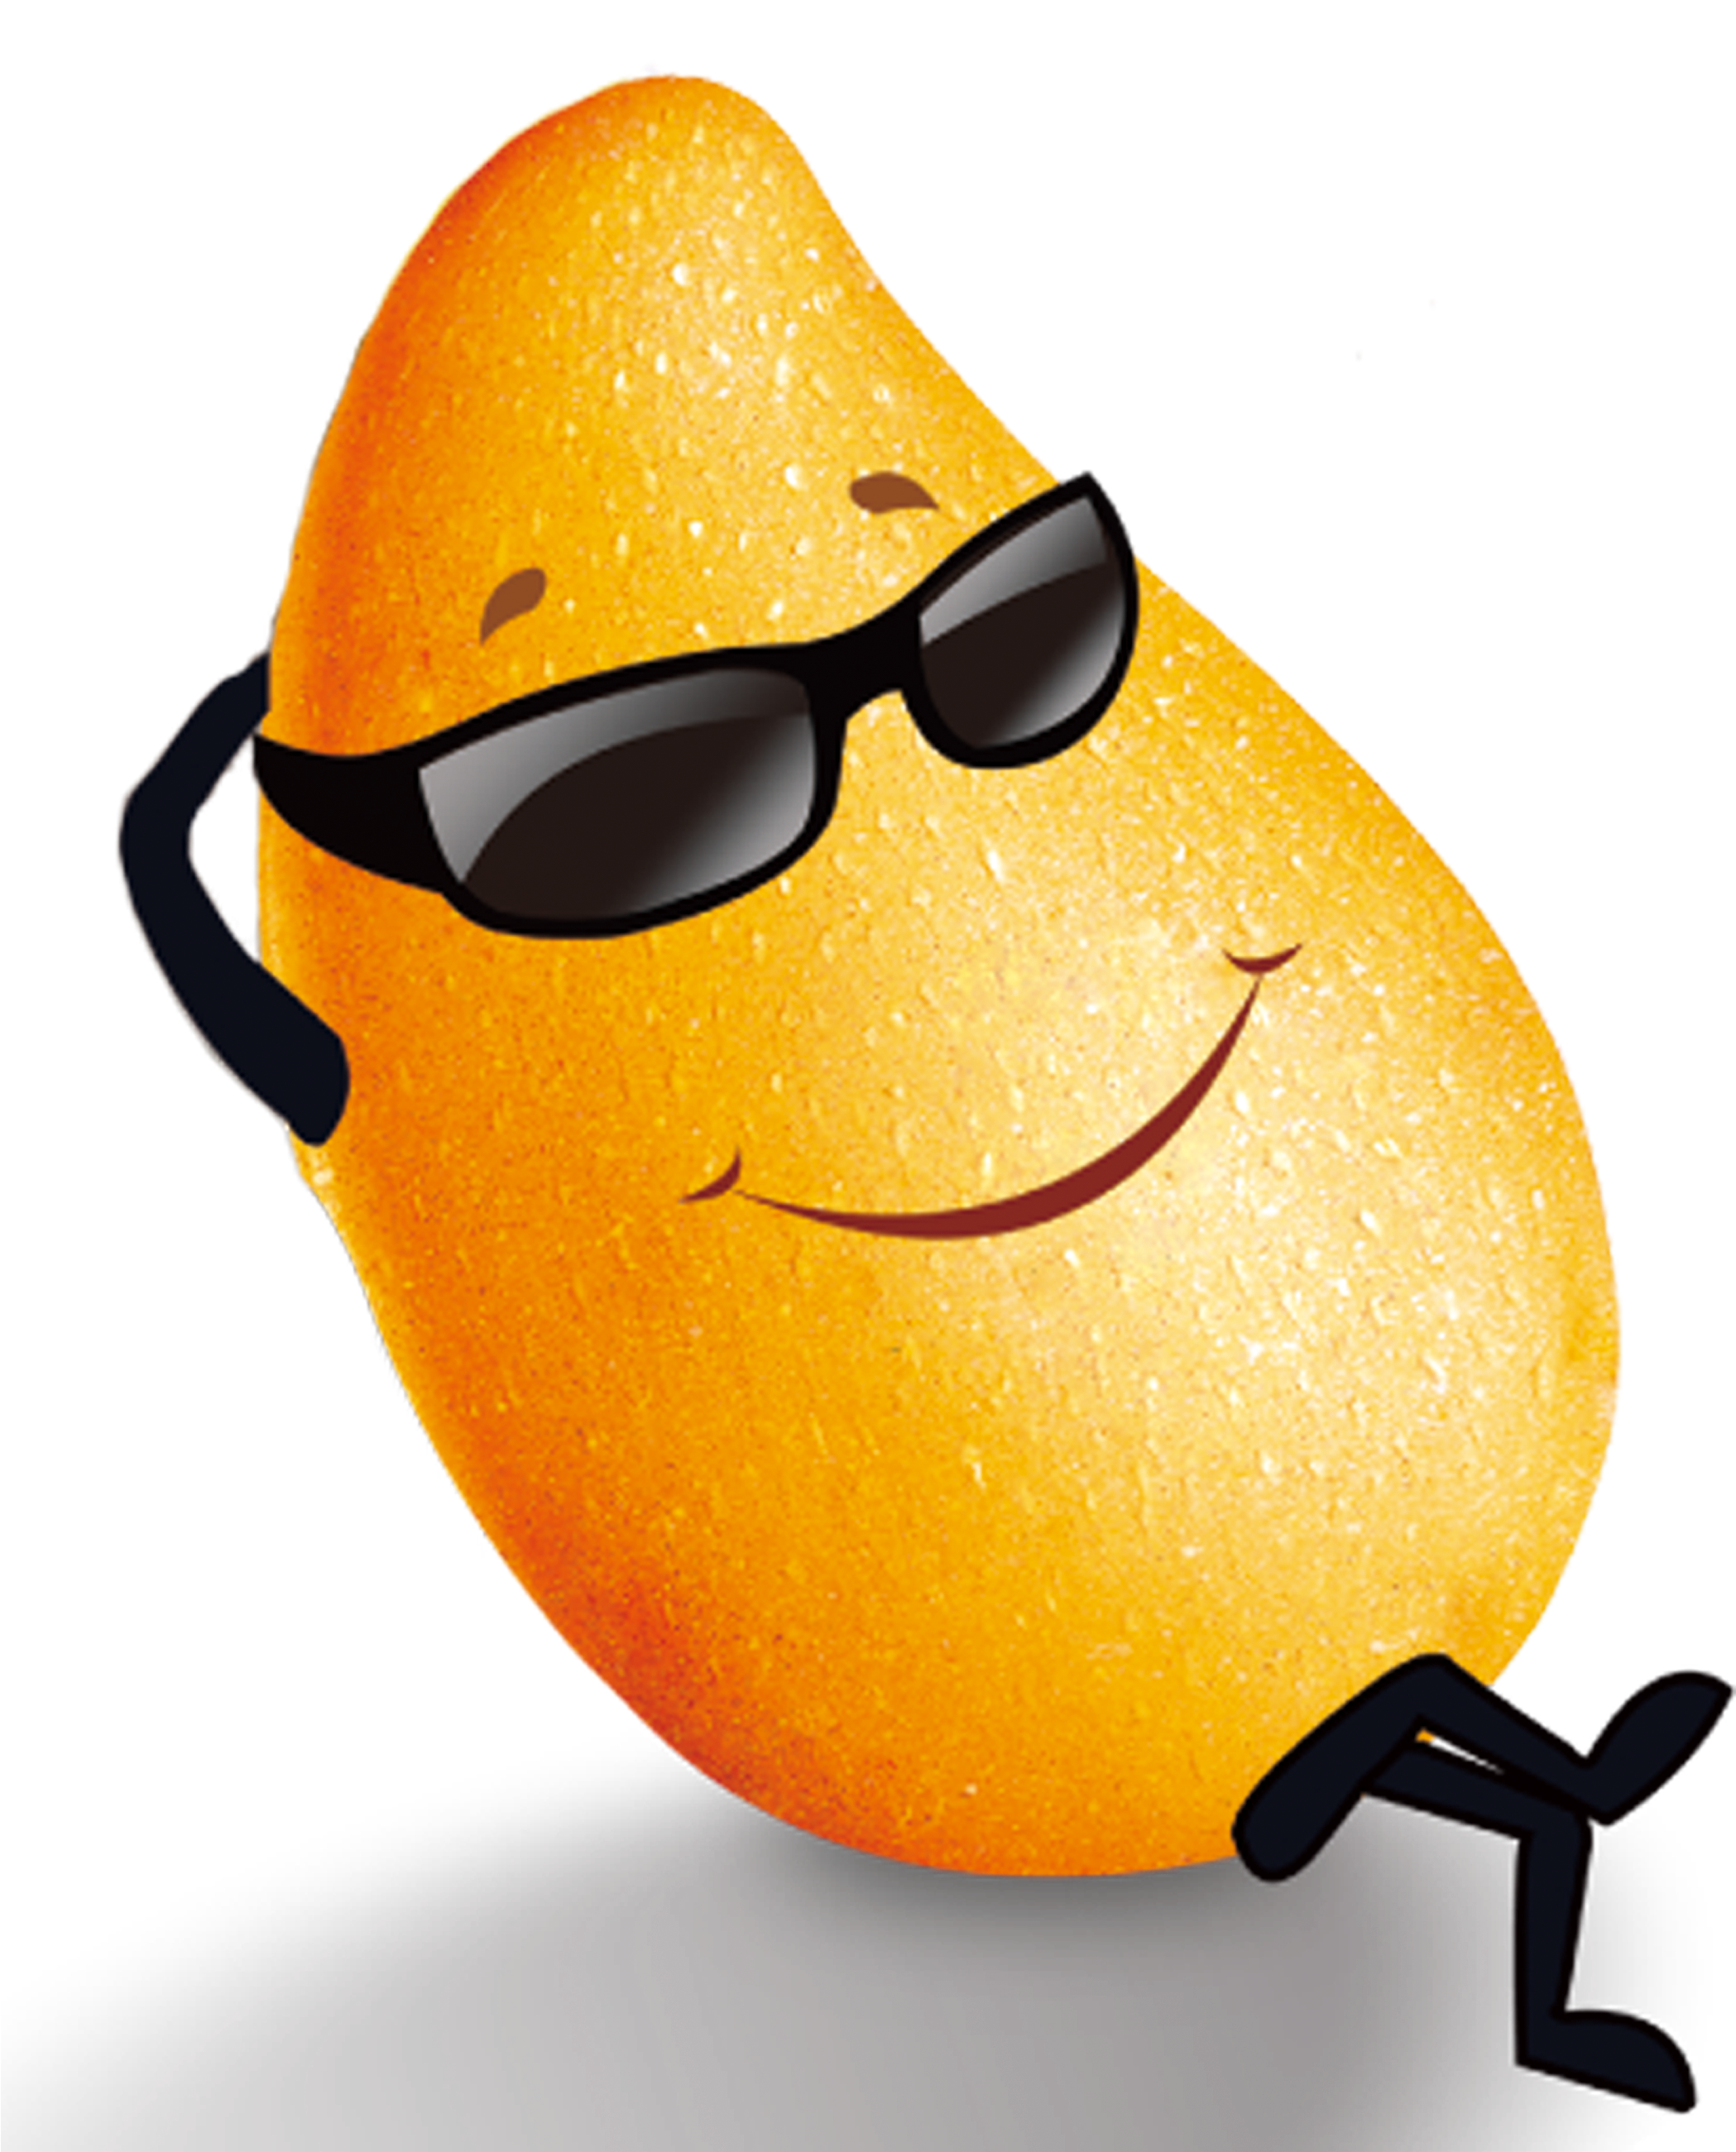 A Yellow Fruit With Sunglasses